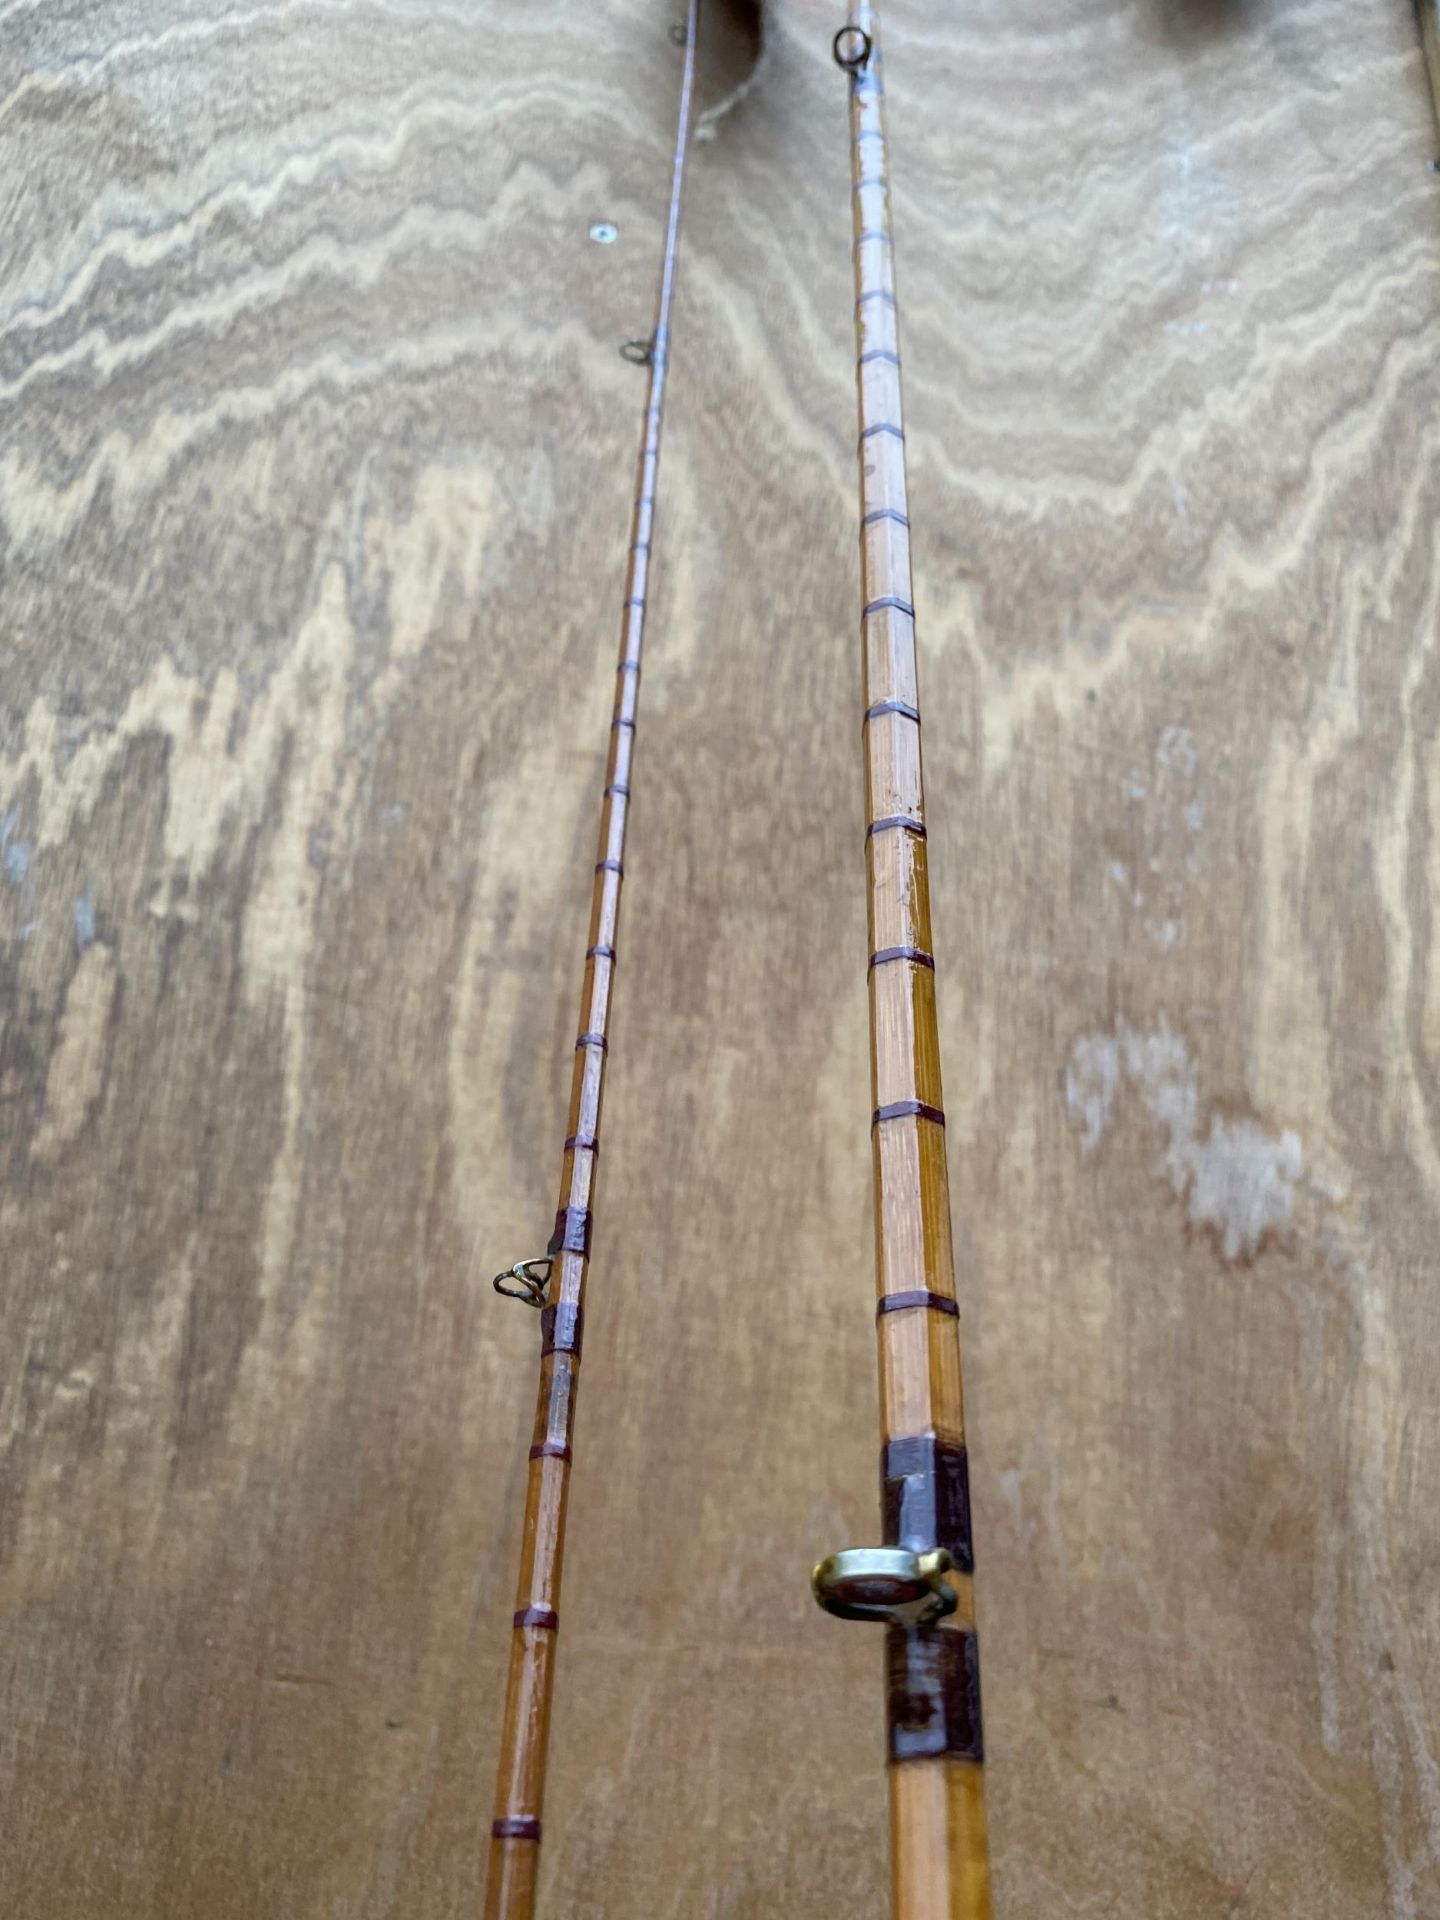 AN S ALLCOCK & SON 'THE RIBBLE' FLY FISHING ROD WITH S ALLCOCK ROD BAG - Image 3 of 5